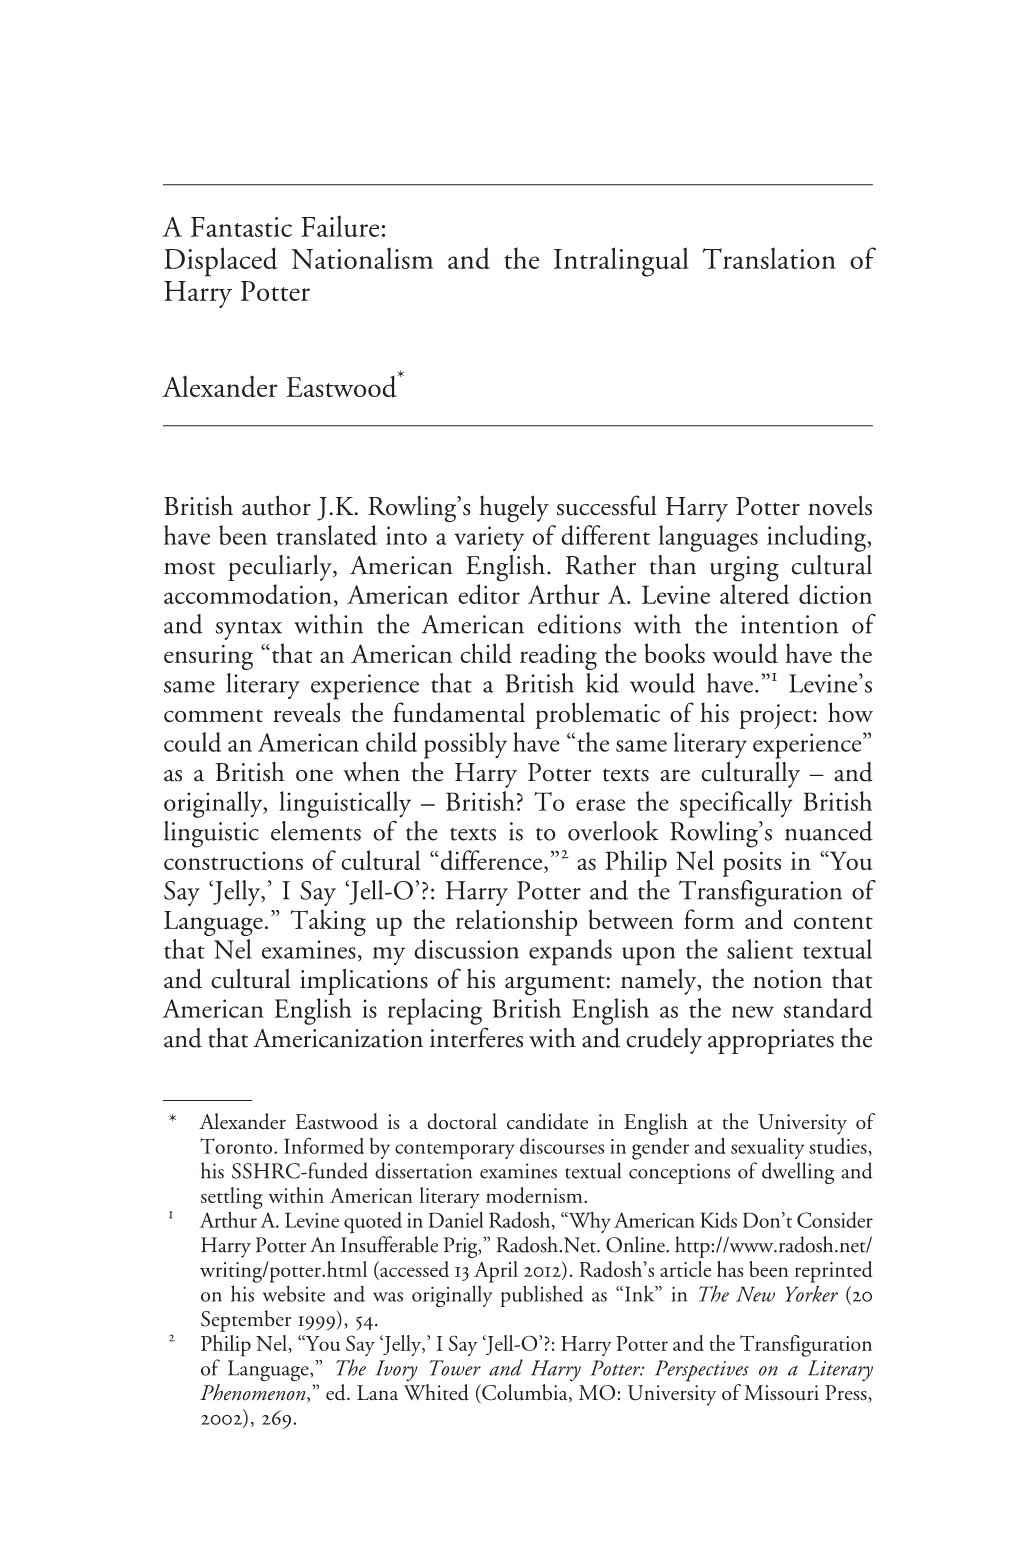 Displaced Nationalism and the Intralingual Translation of Harry Potter